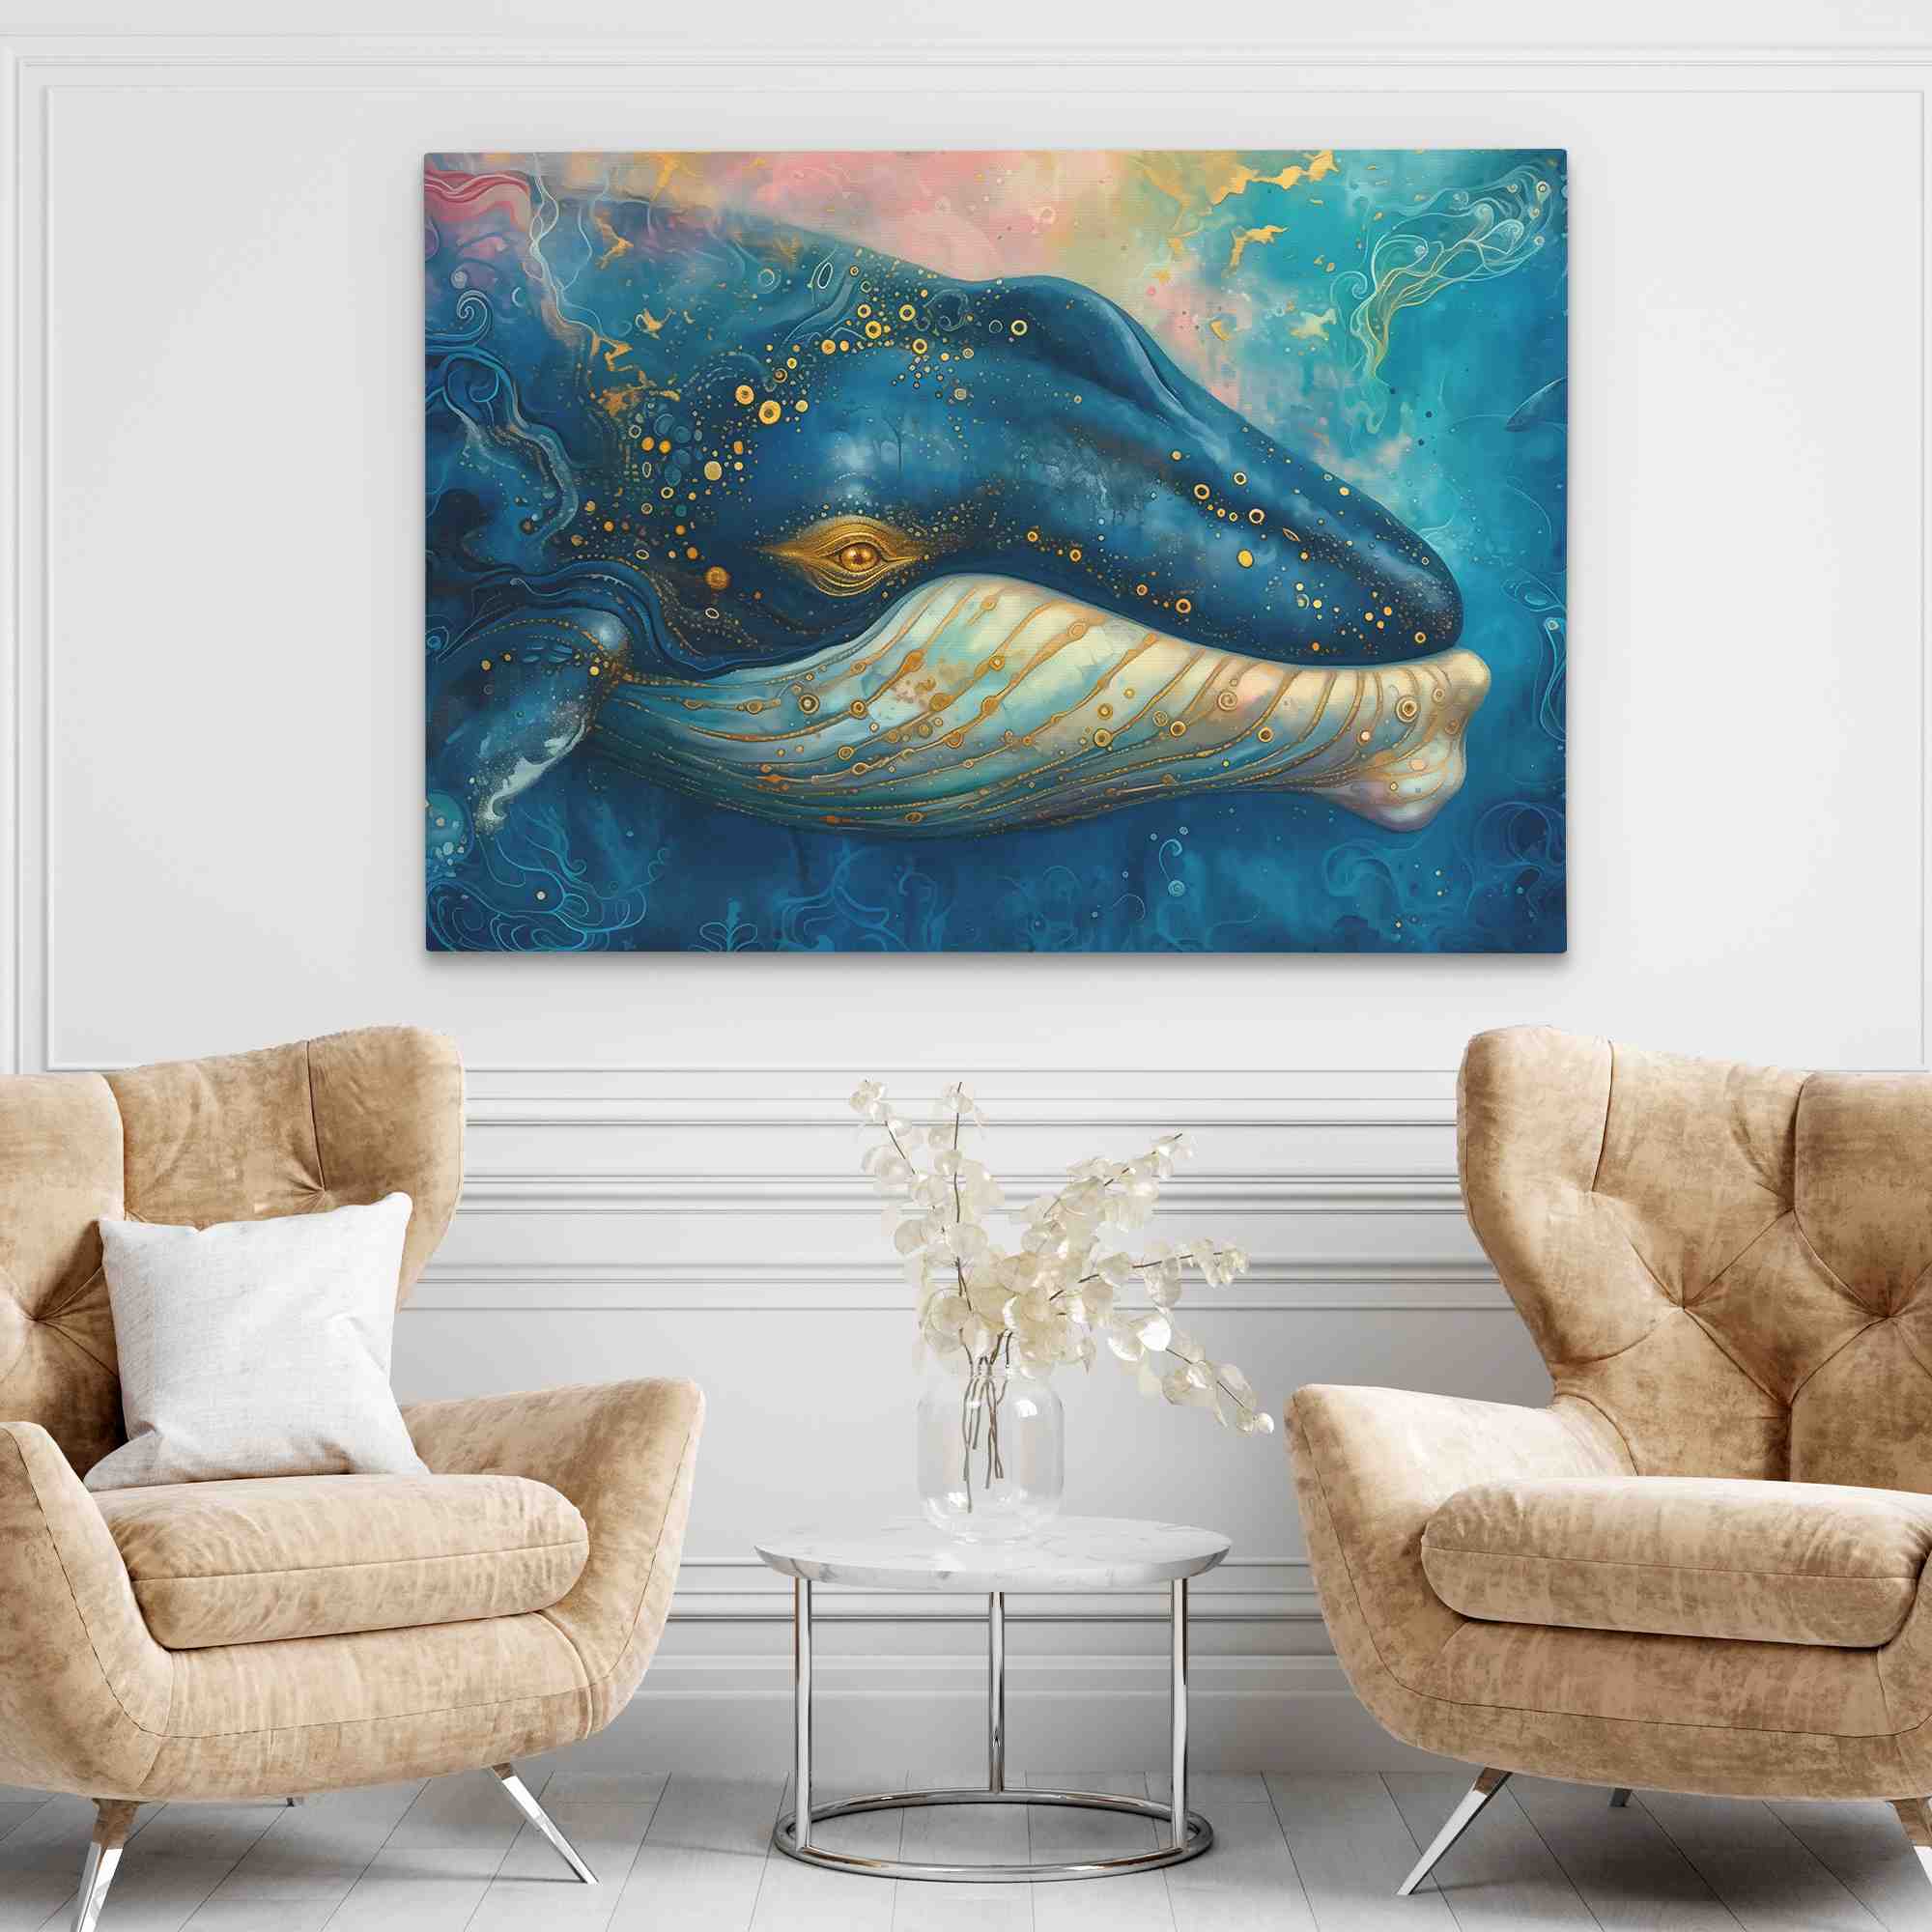 a painting of a blue whale with gold accents